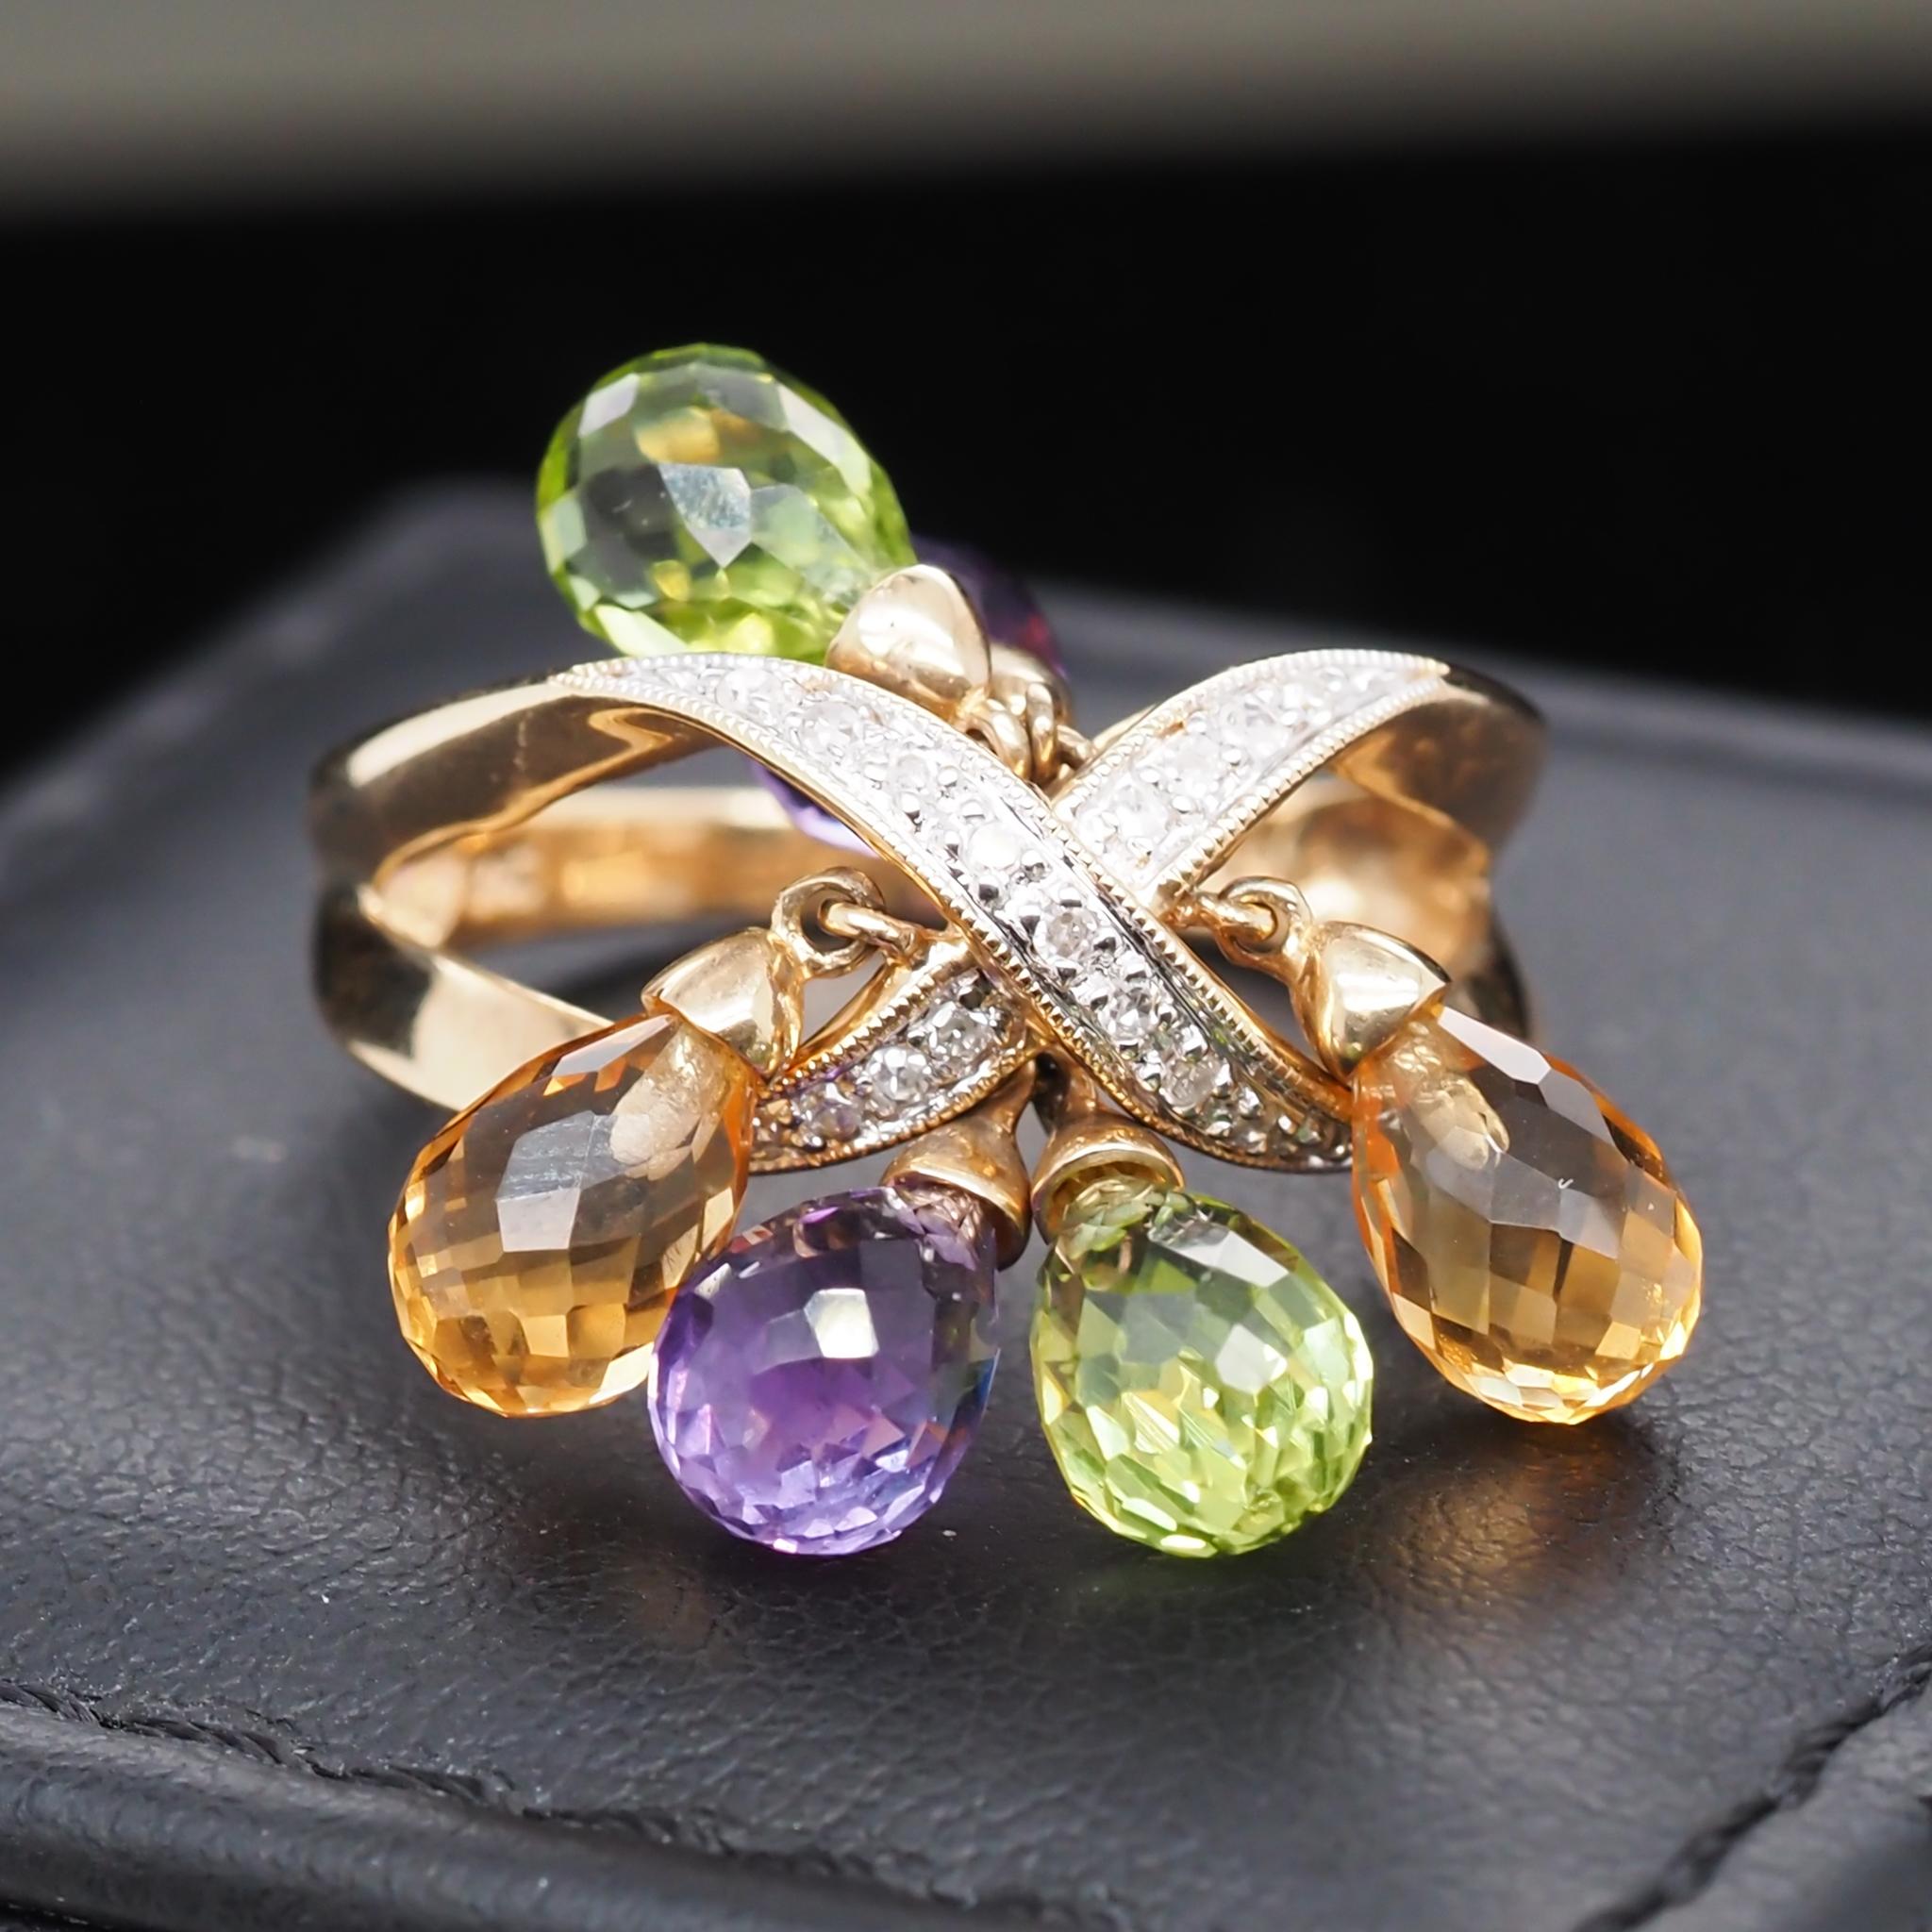 14 Karat Yellow Gold Diamond and Dangling Citrine, Amethyst and Peridot Ring In Good Condition For Sale In Atlanta, GA